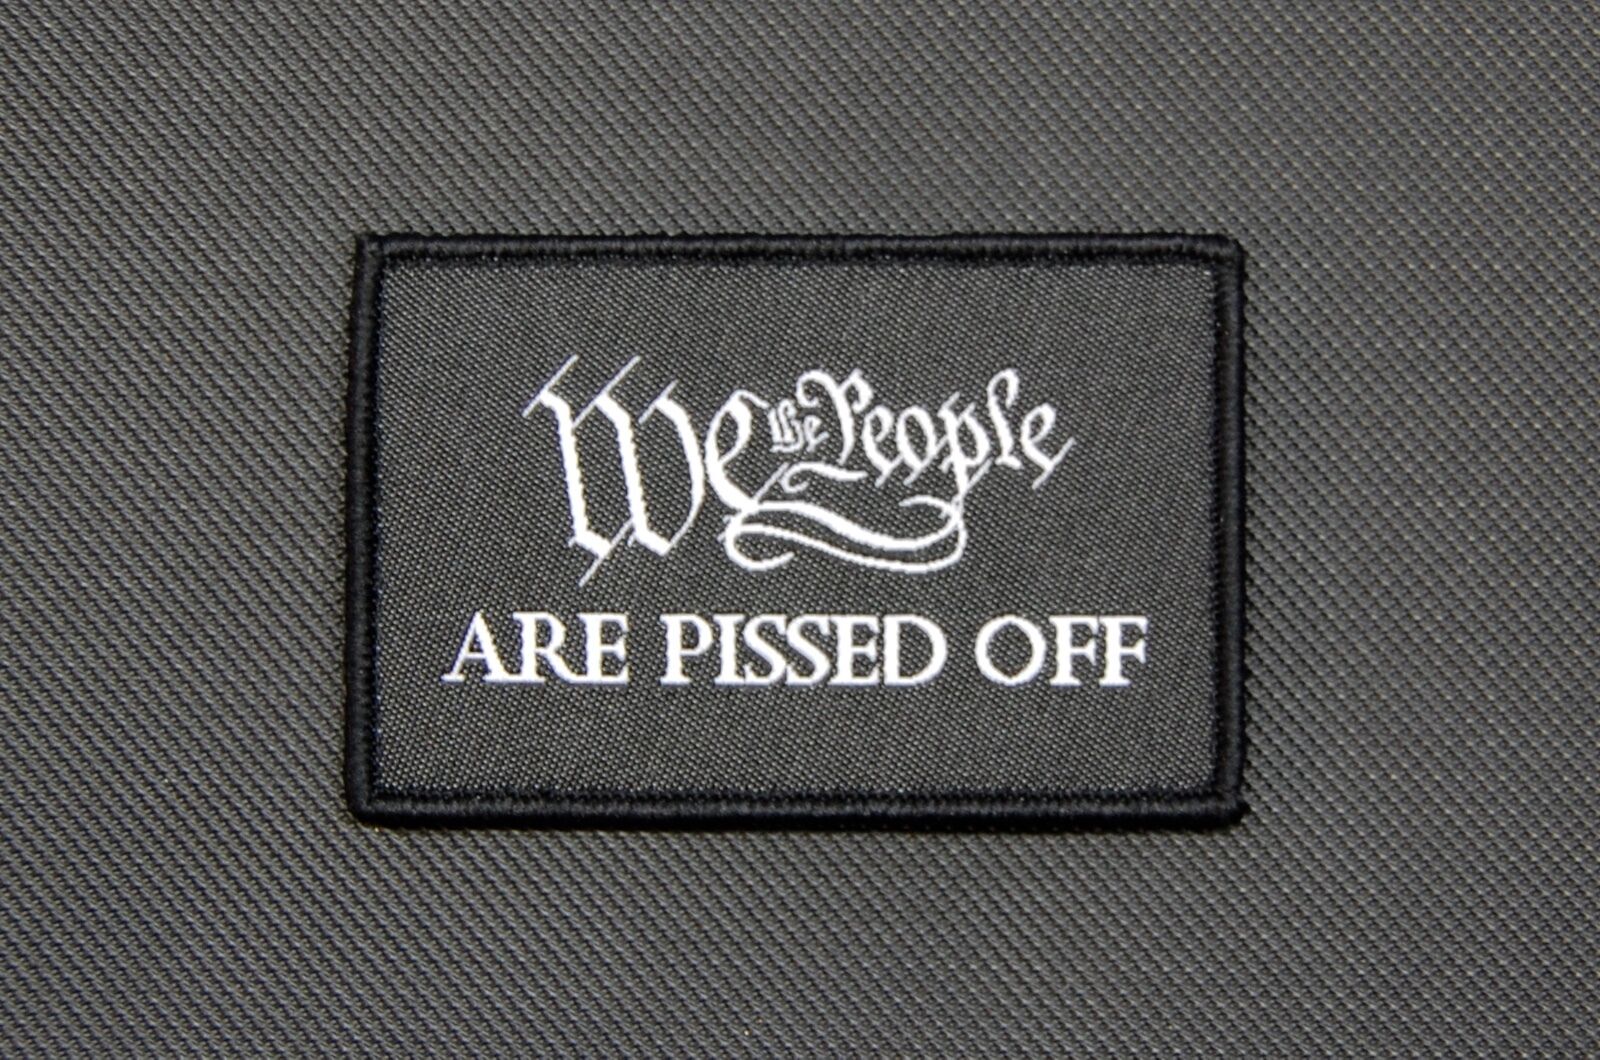 WE THE PEOPLE ARE PISSED Woven Morale Uniform Patch Hook/Loop